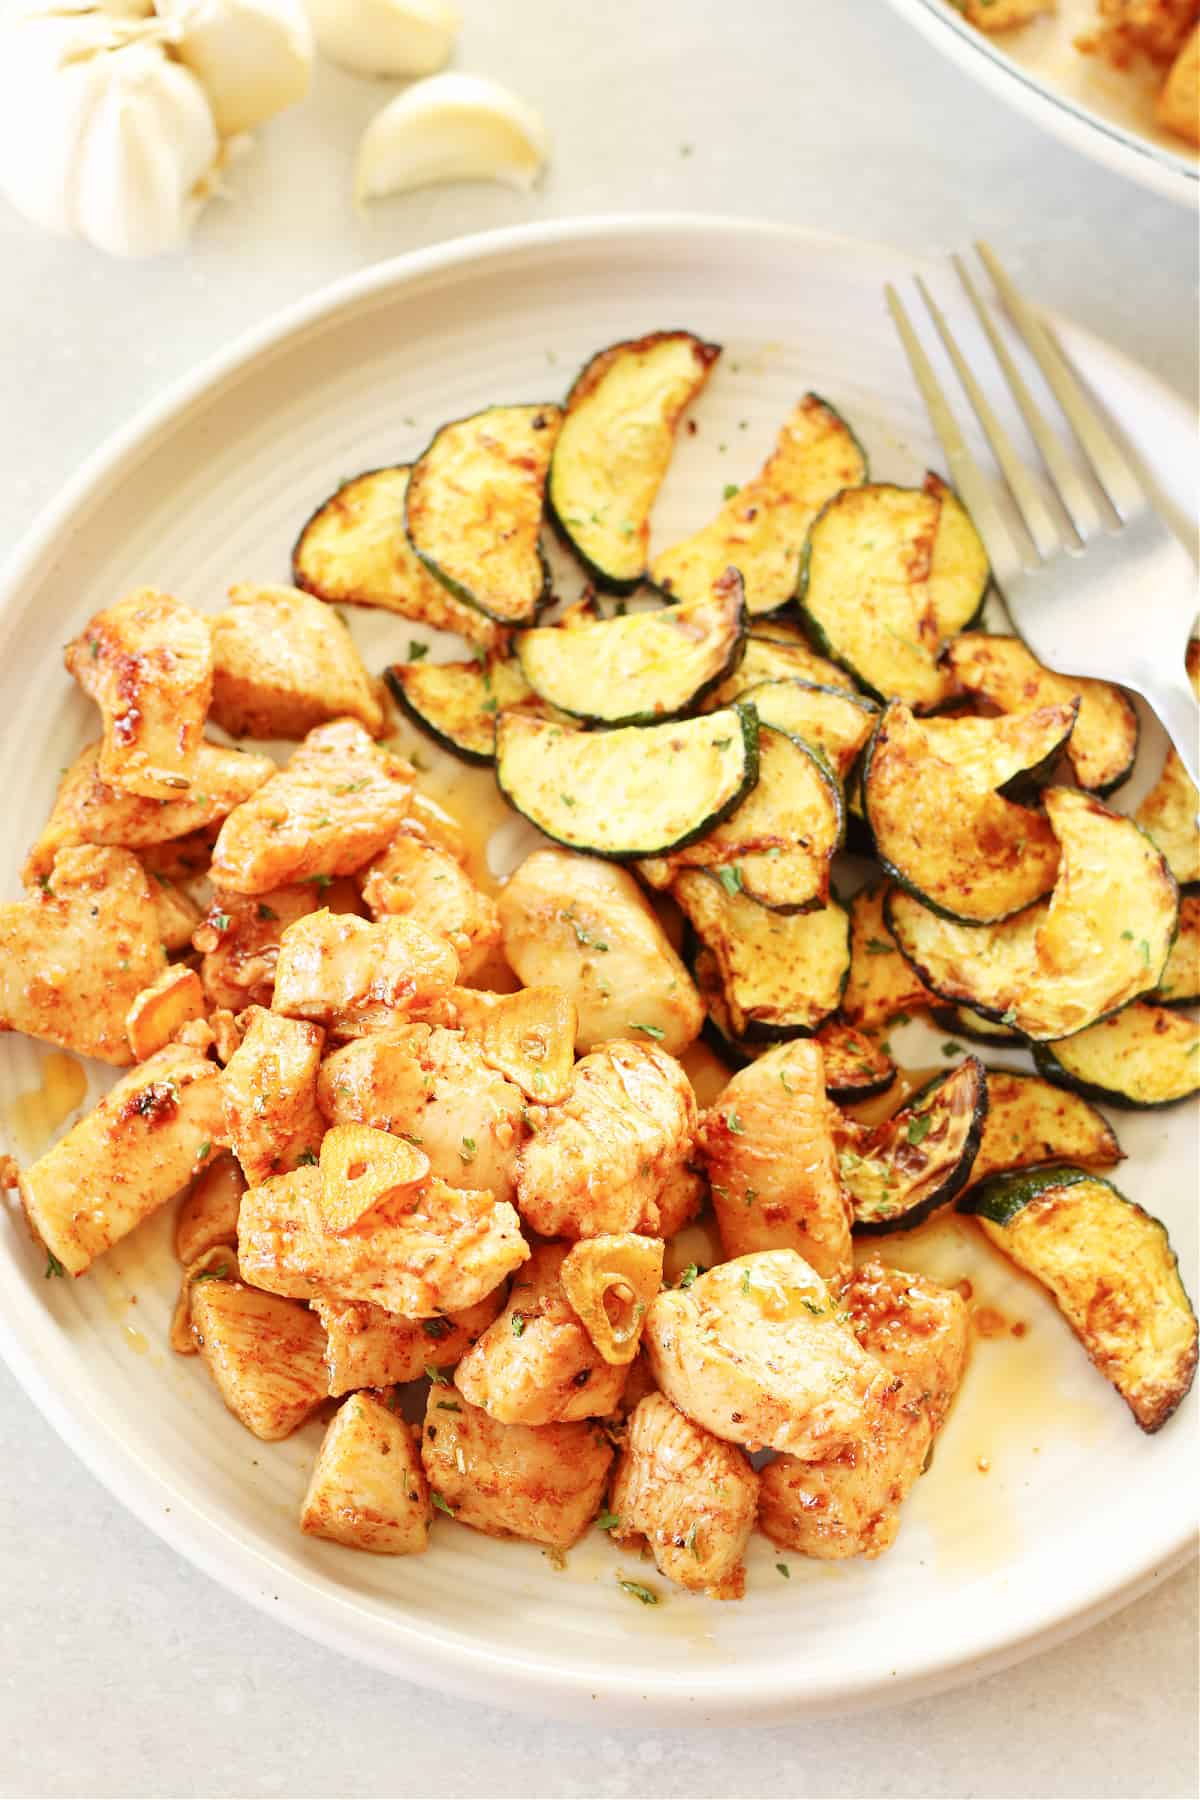 Chicken bites and cooked zucchini slices on a dinner plate.